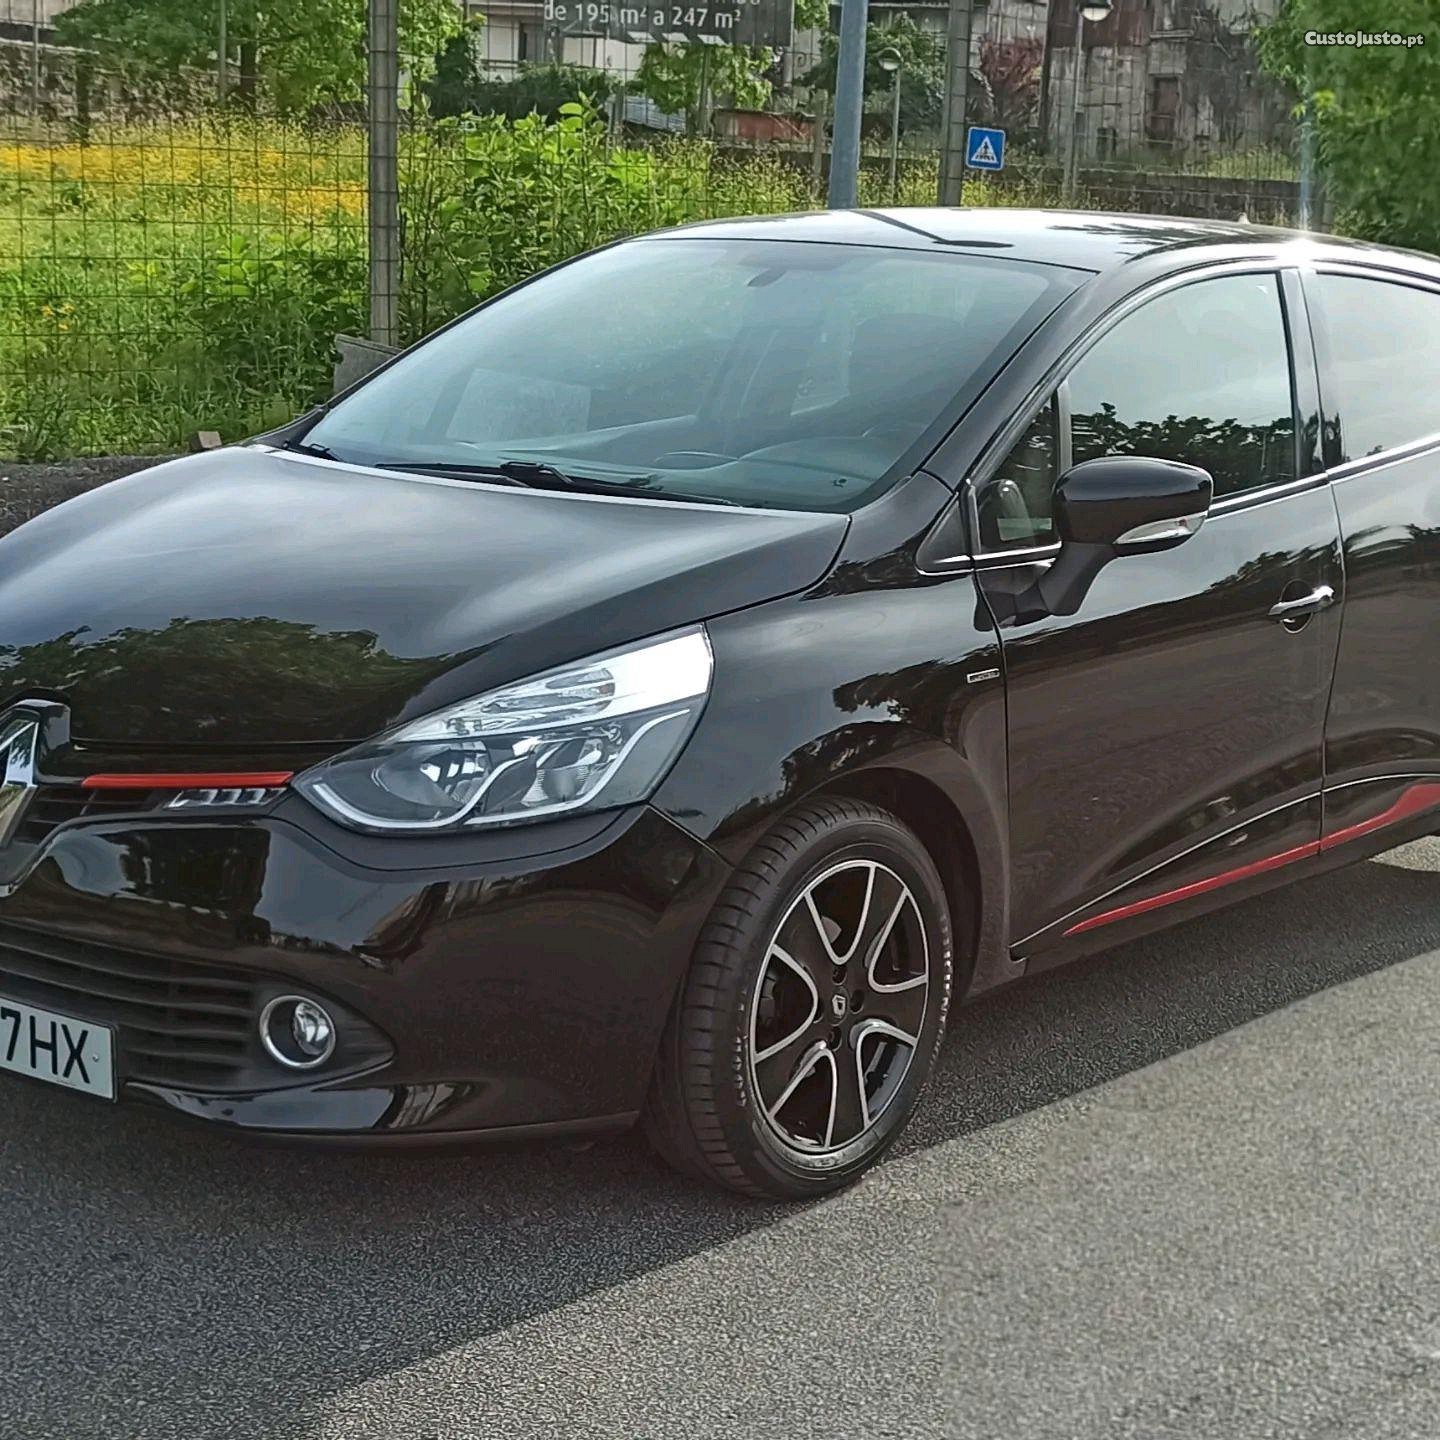 Renault Clio Limited 1.0 turbo